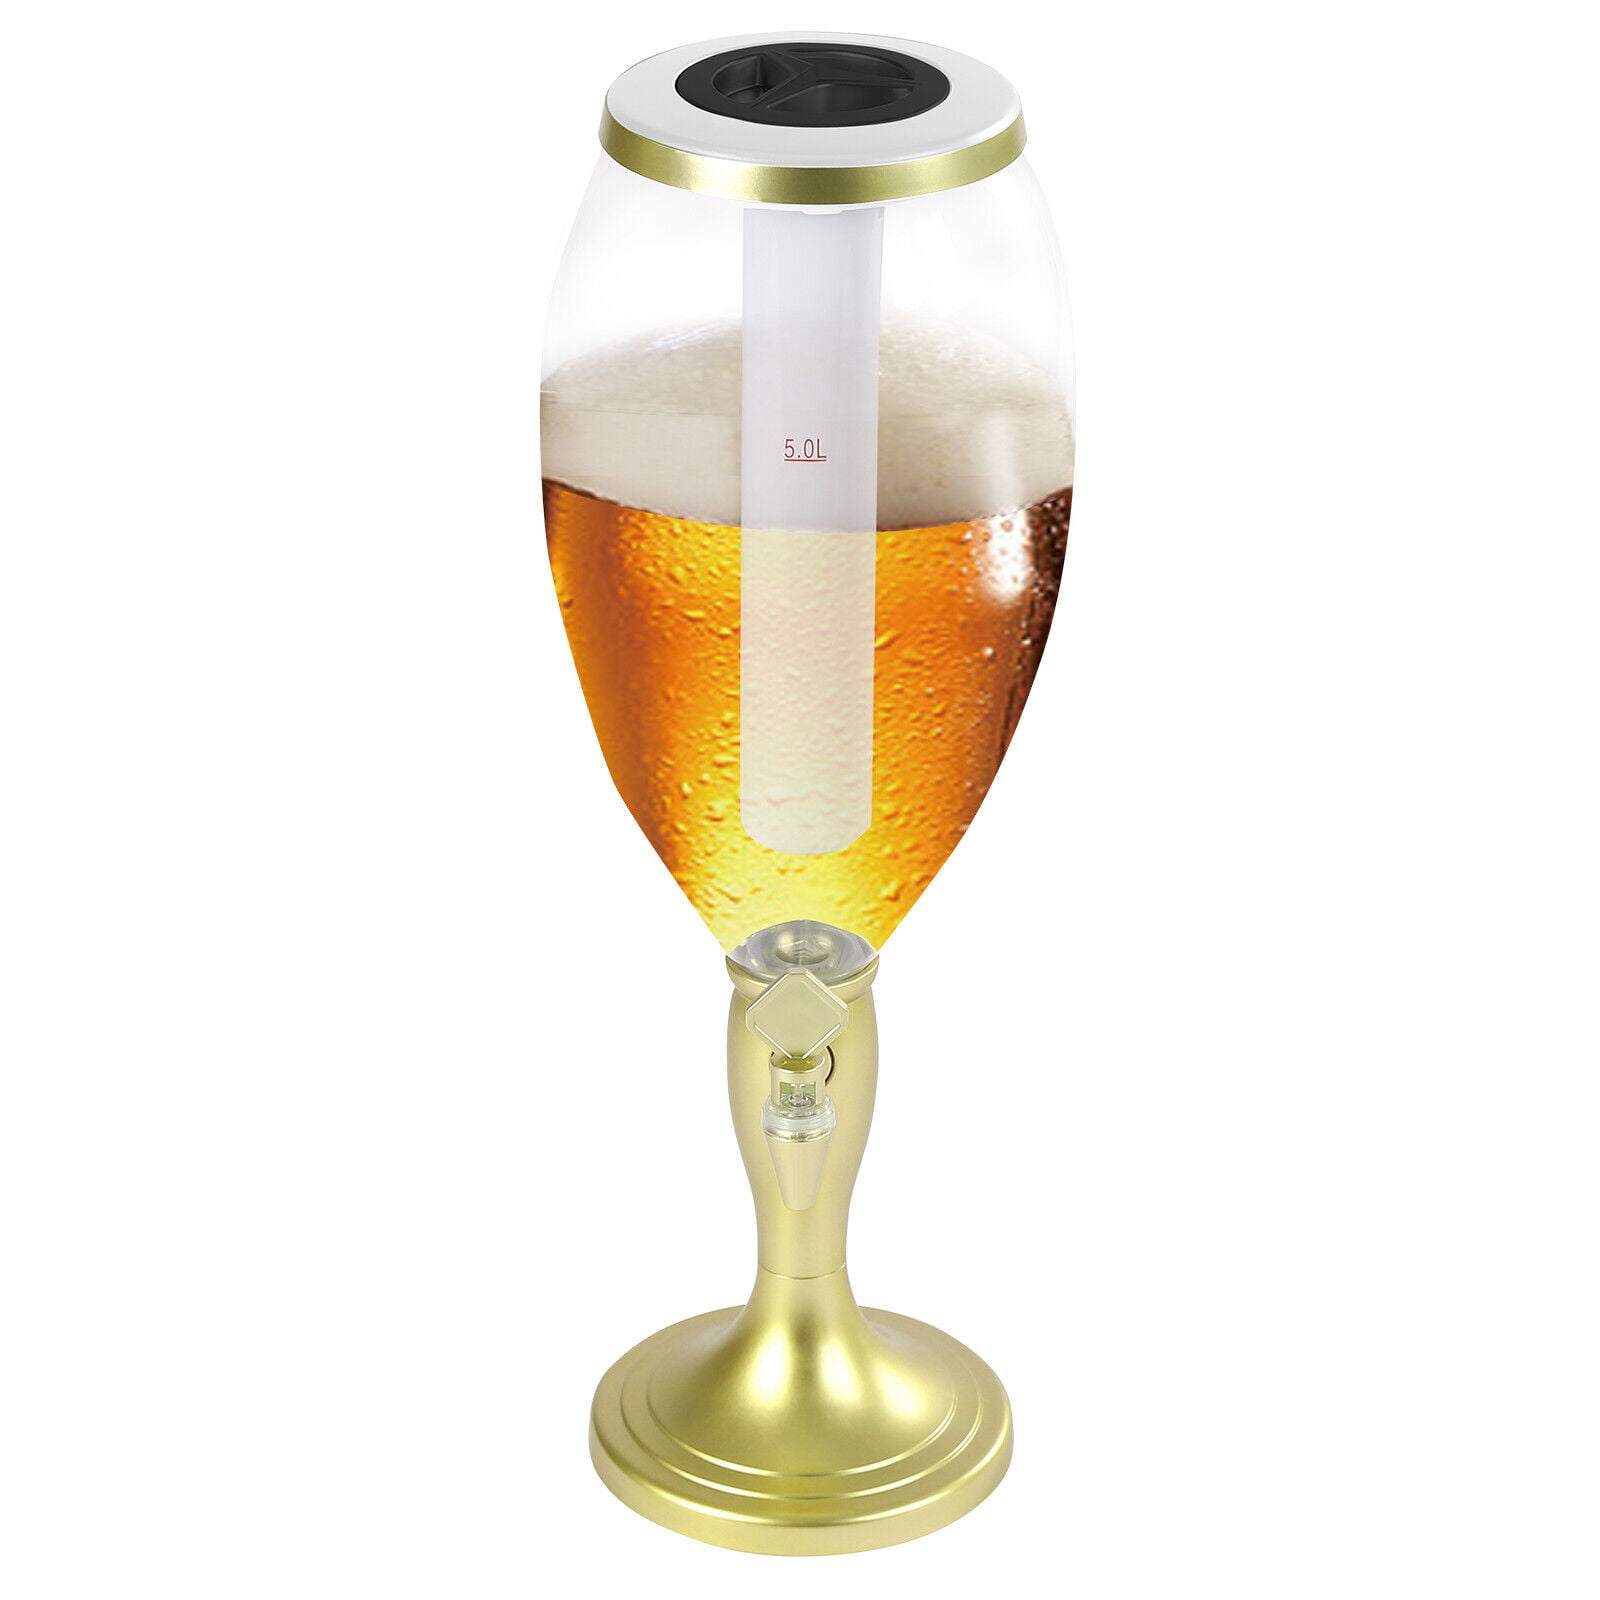 Beer Dispenser Margarita Tower, 50oz Mimosa Tower Dispenser with Ice Tube  and LED Light, Tabletop Drink Tower Dispenser 1.6 qt for Beer, Margarita